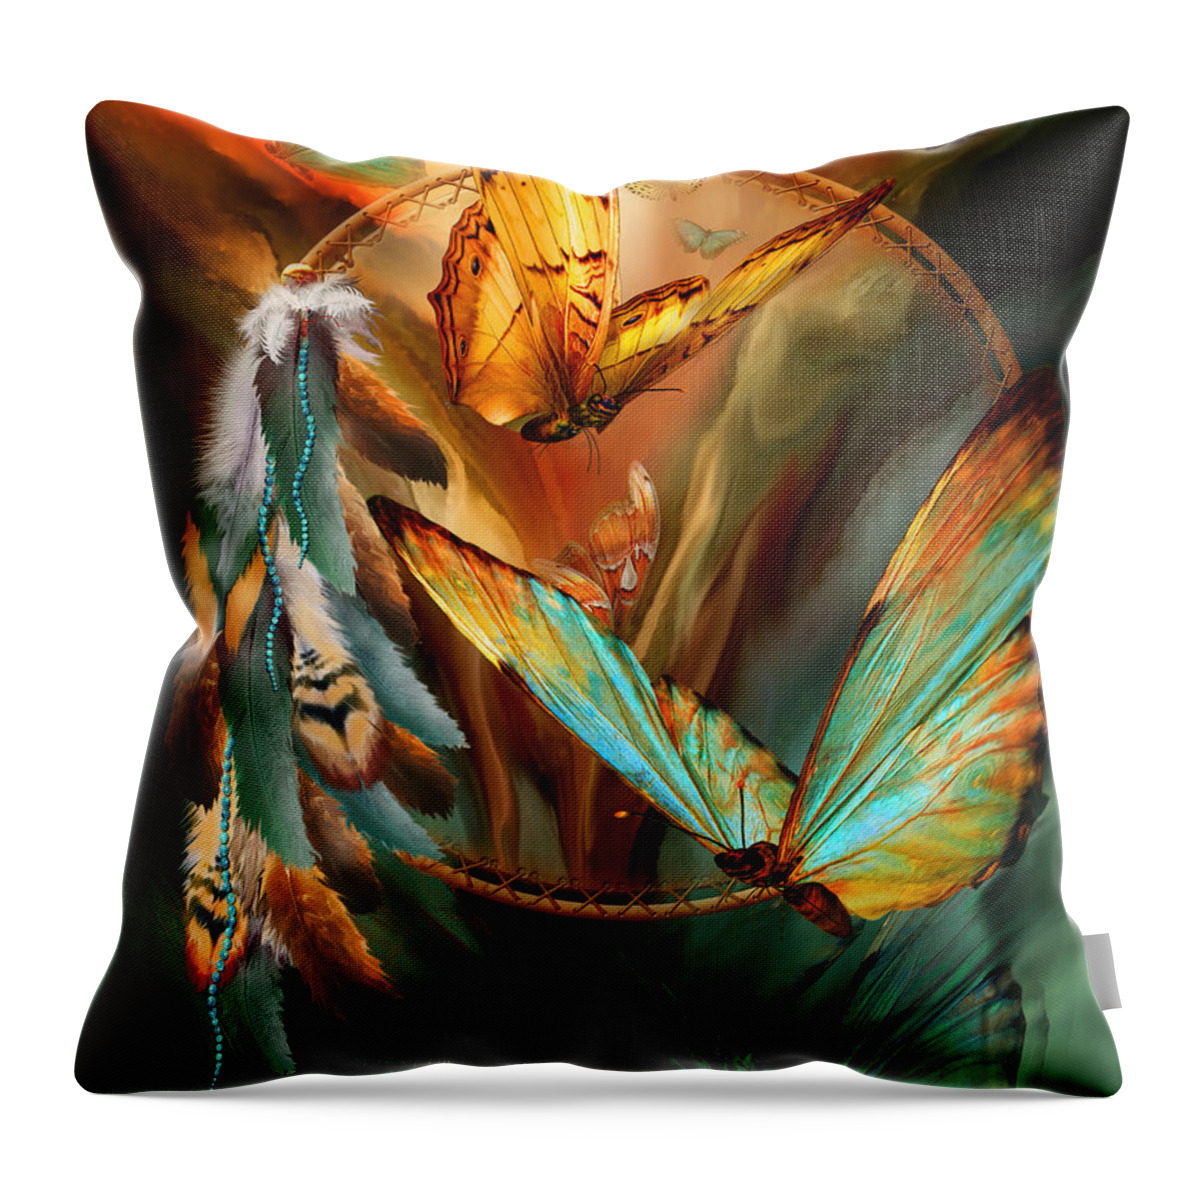 Carol Cavalaris Throw Pillow featuring the mixed media Dream Catcher - Spirit Of The Butterfly by Carol Cavalaris